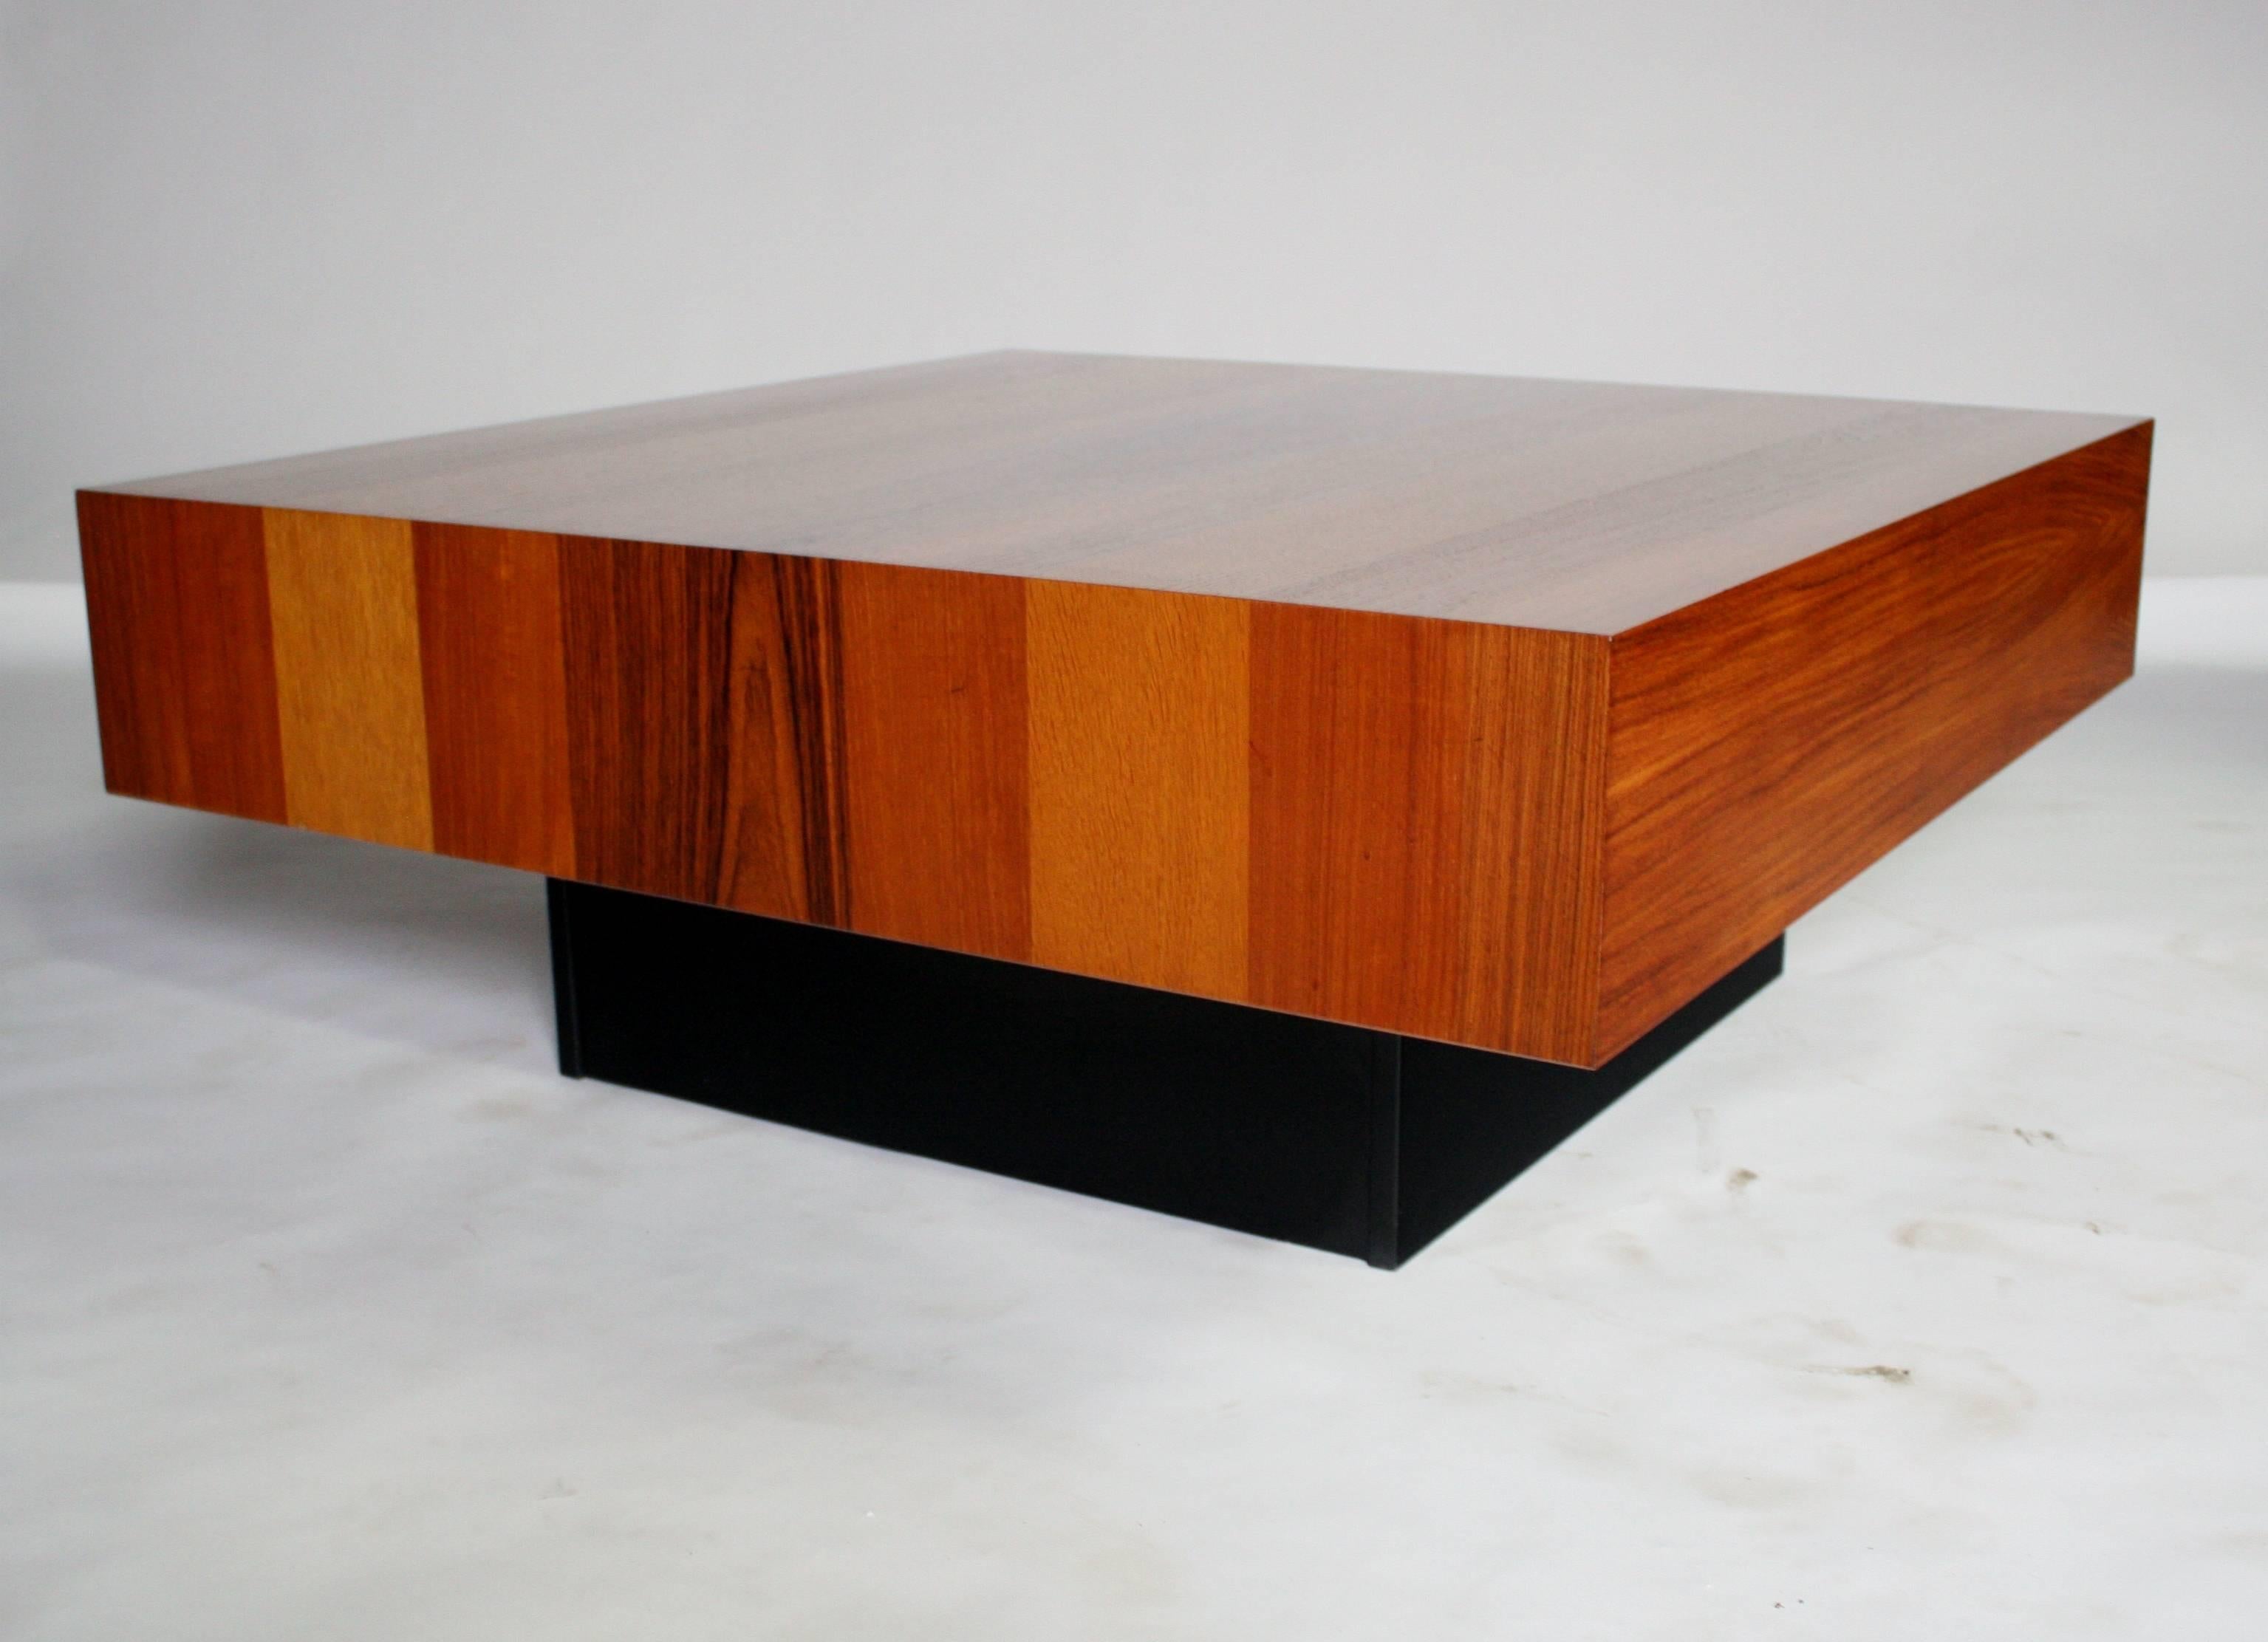 Square wood coffee table by Drylund of Denmark designed in a parquetry of rosewood, palisander, teak and maple resting on a black lacquered cube base. Remarkably excellent condition.